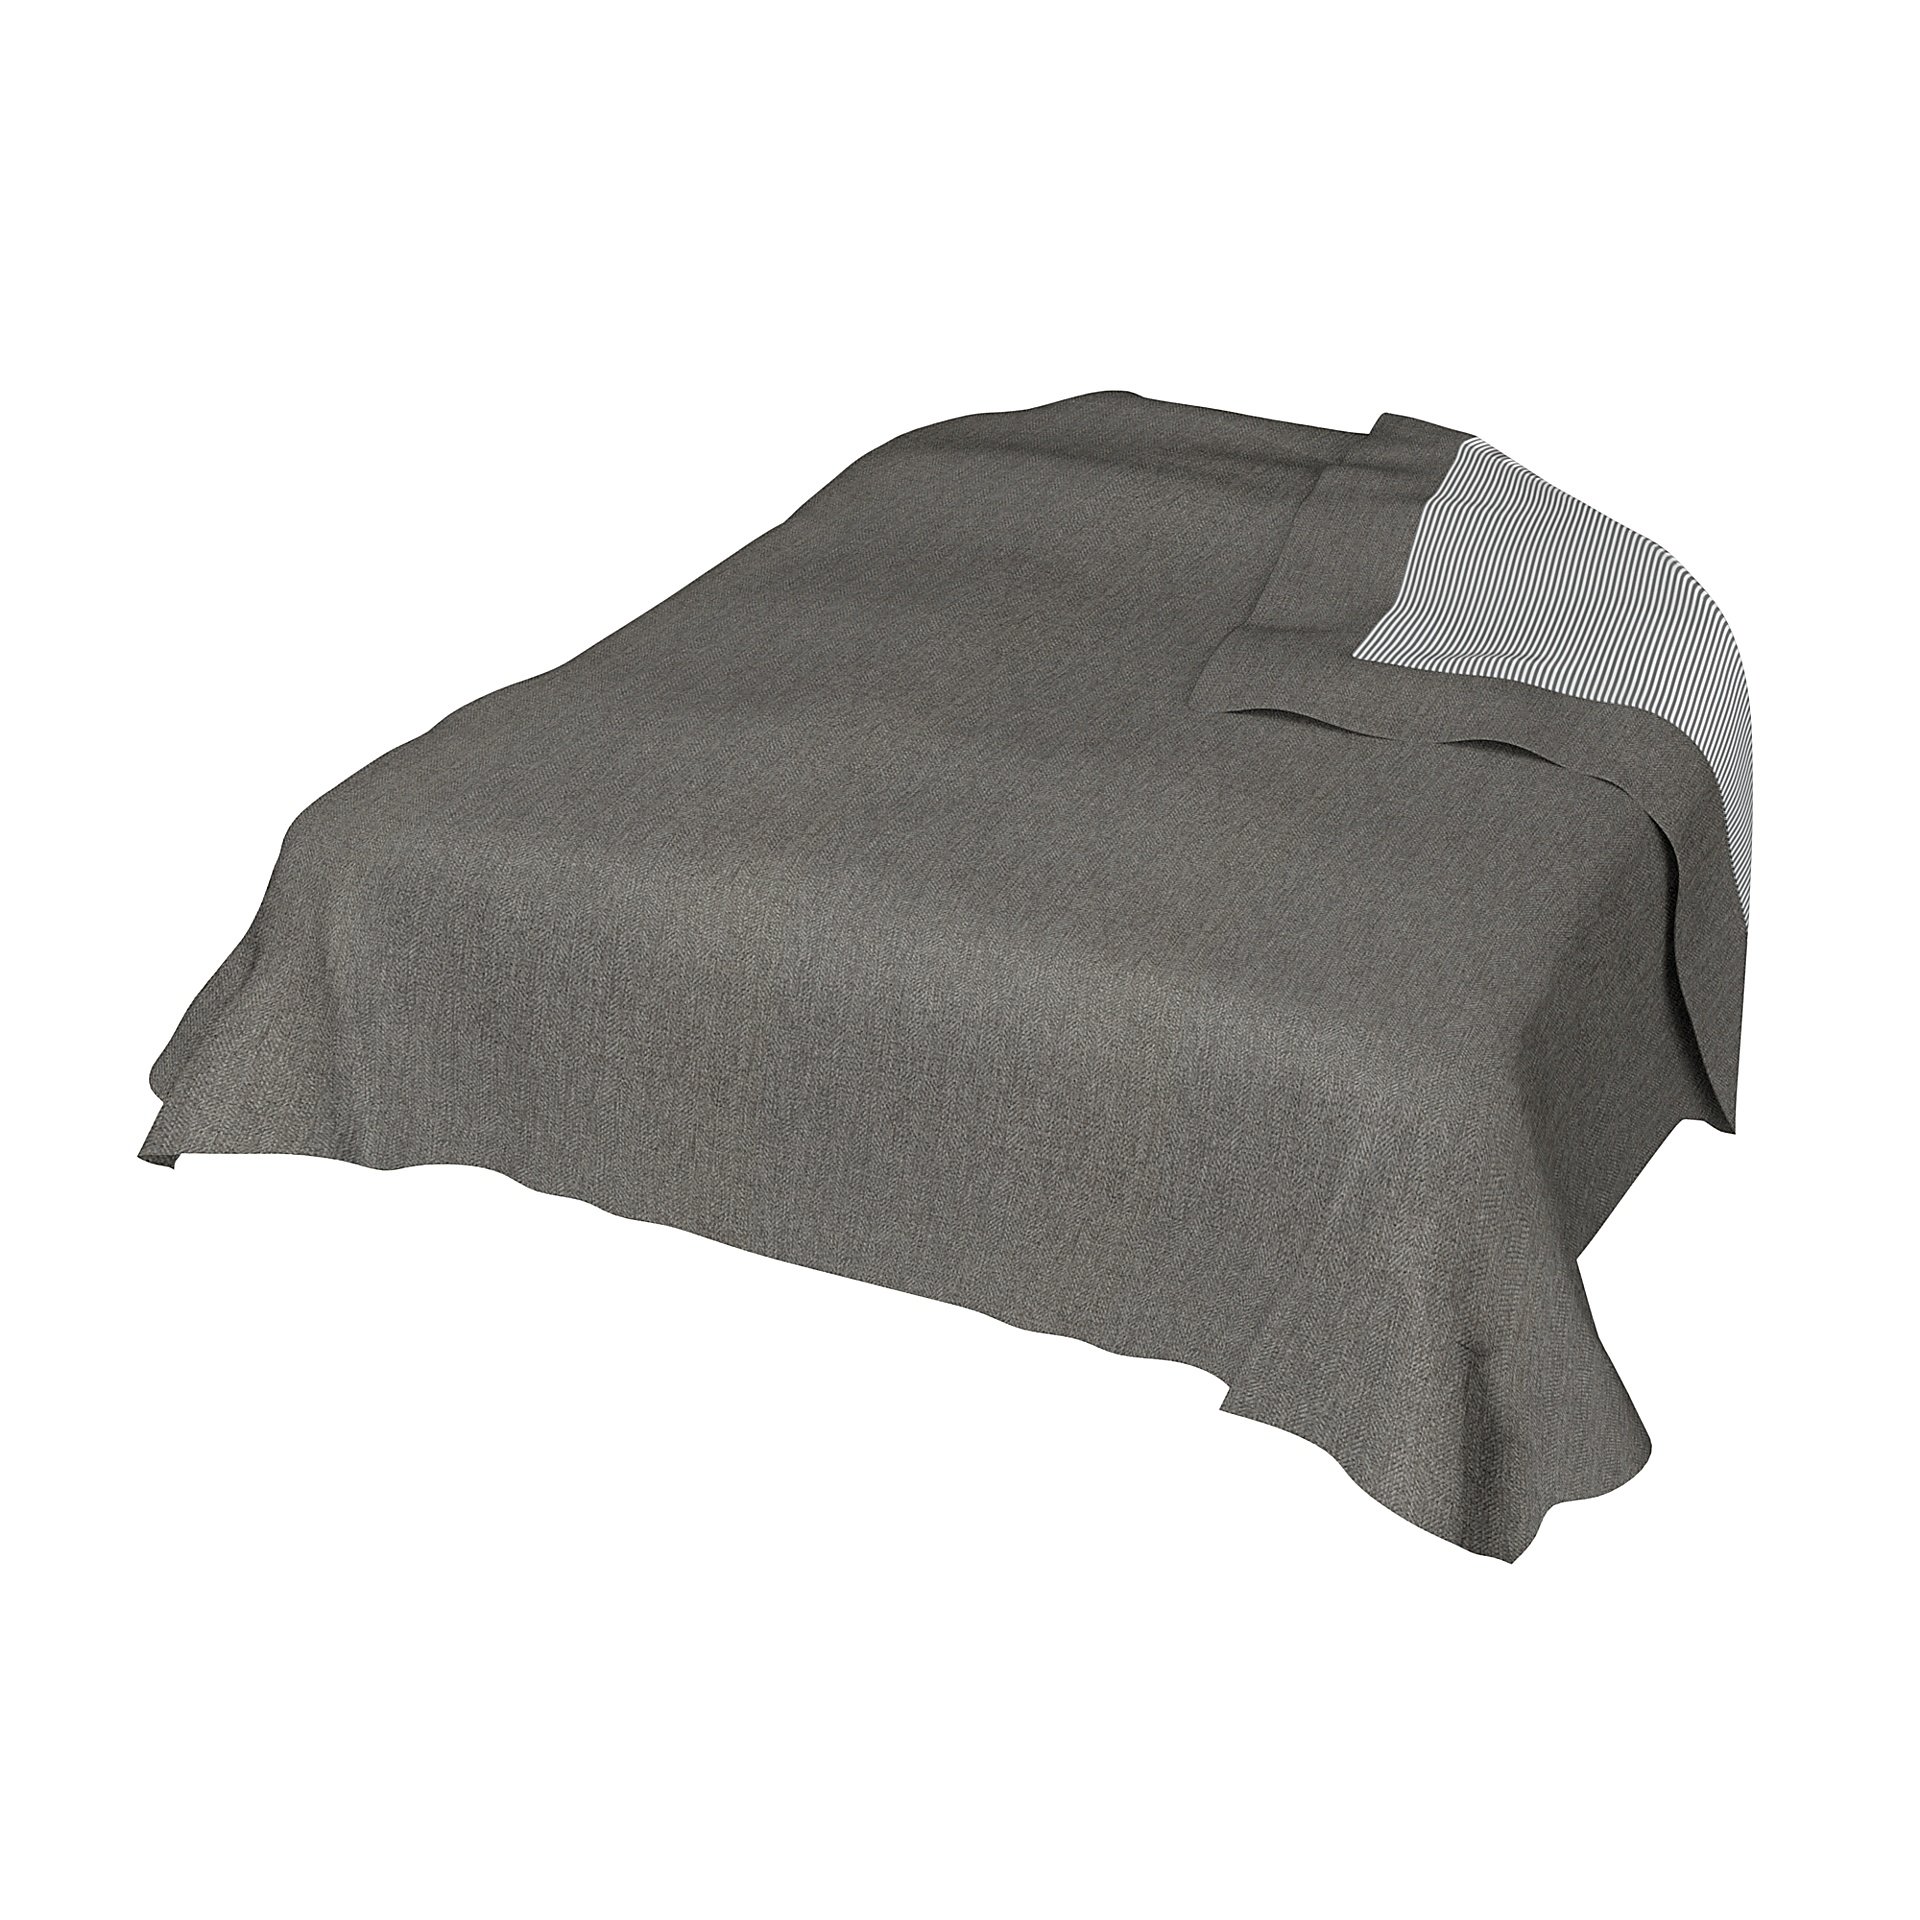 Bedspread, Taupe, Boucle & Texture - Bemz